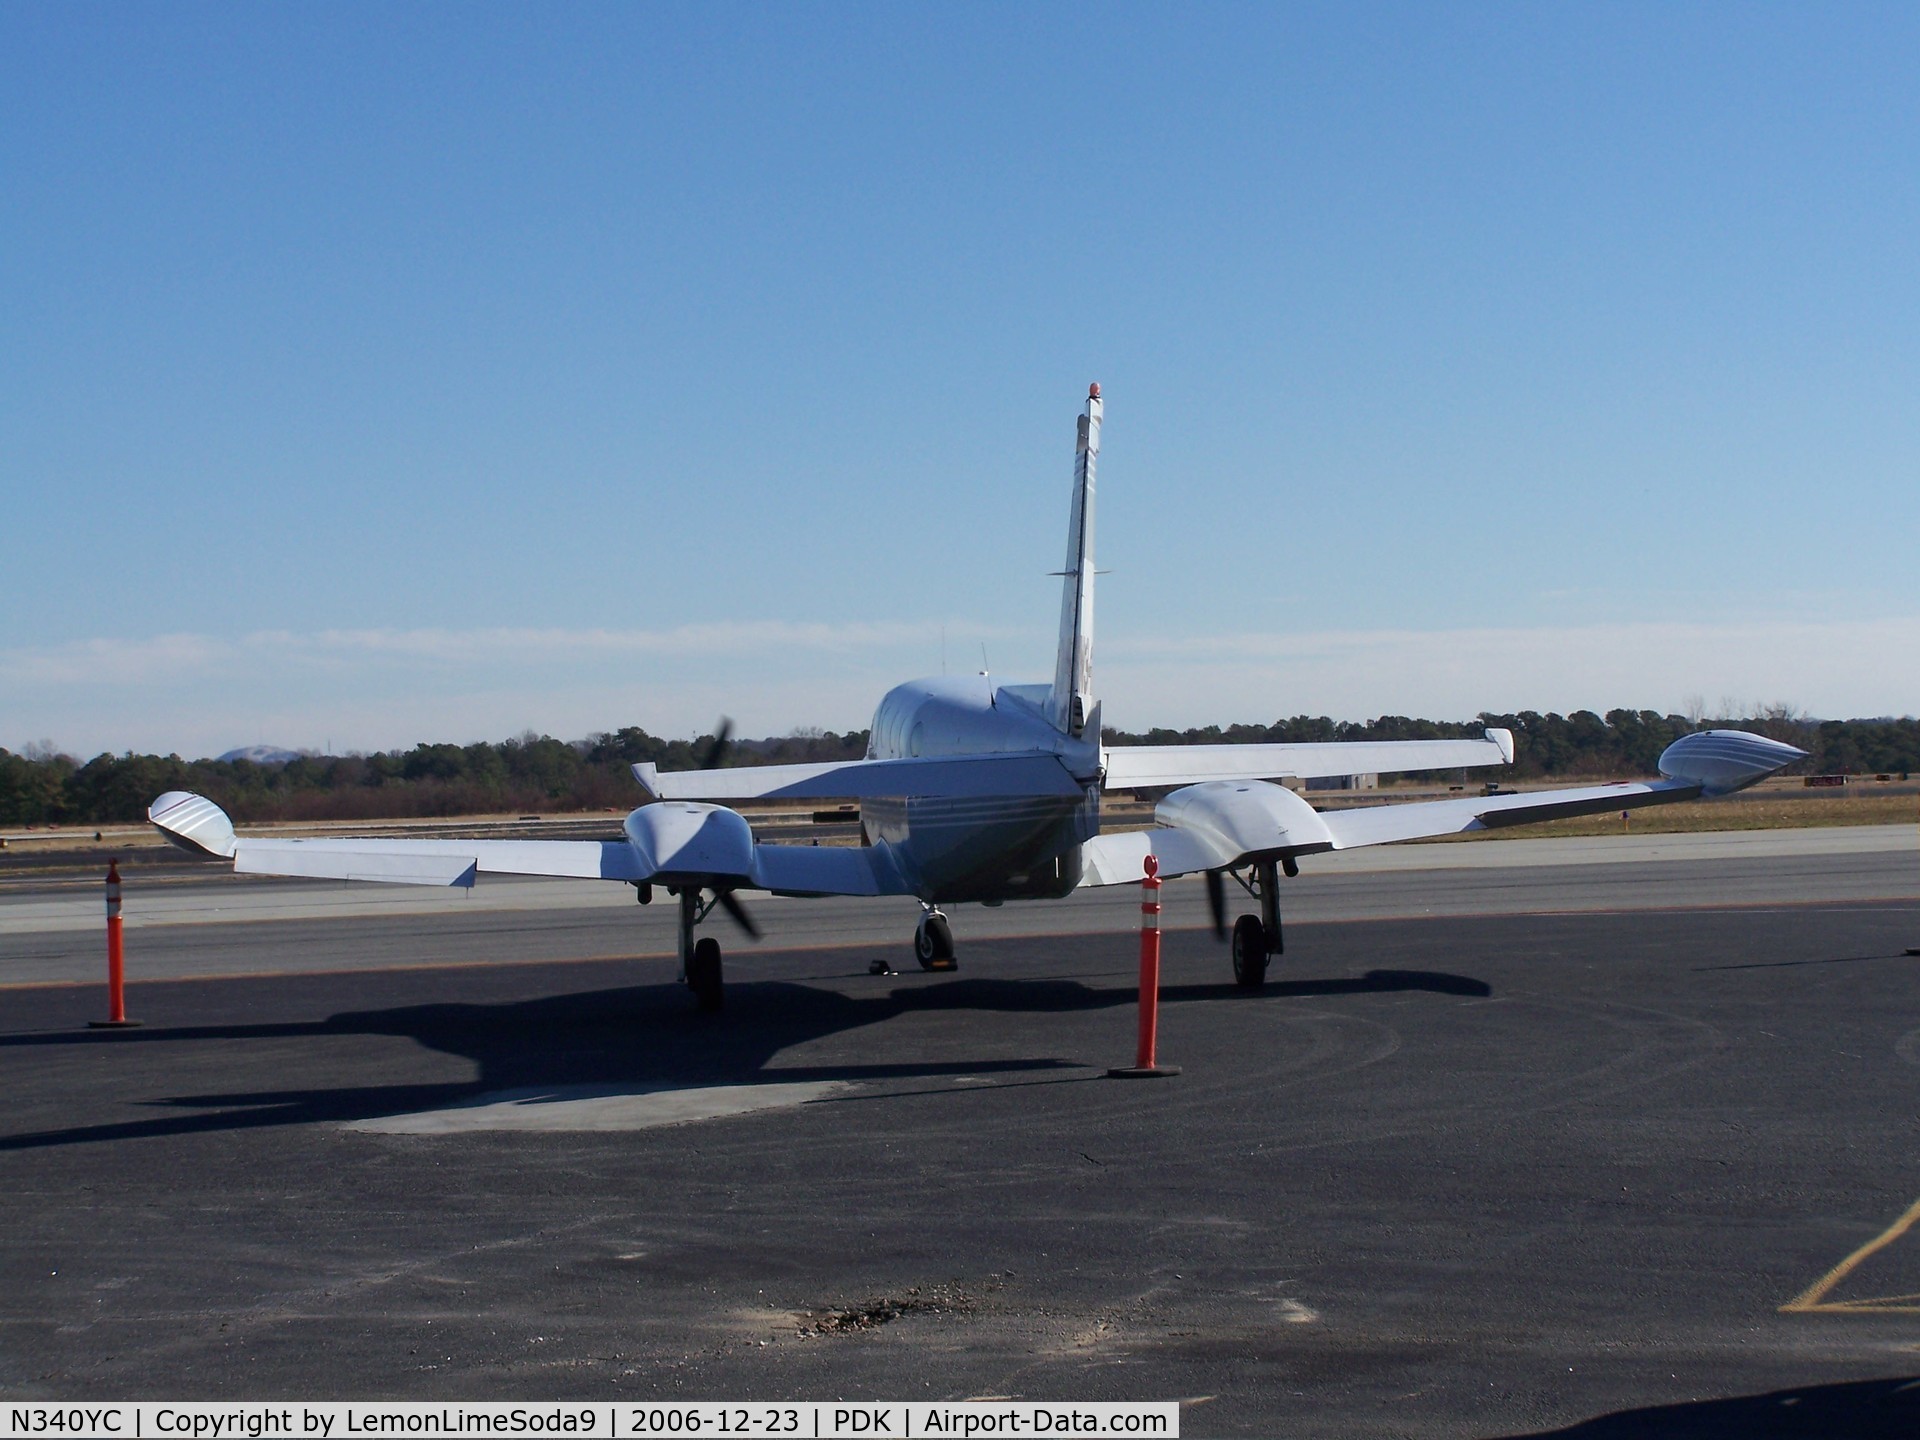 N340YC, 1977 Cessna 340A C/N 340A0375, This was taken during my day at PDK